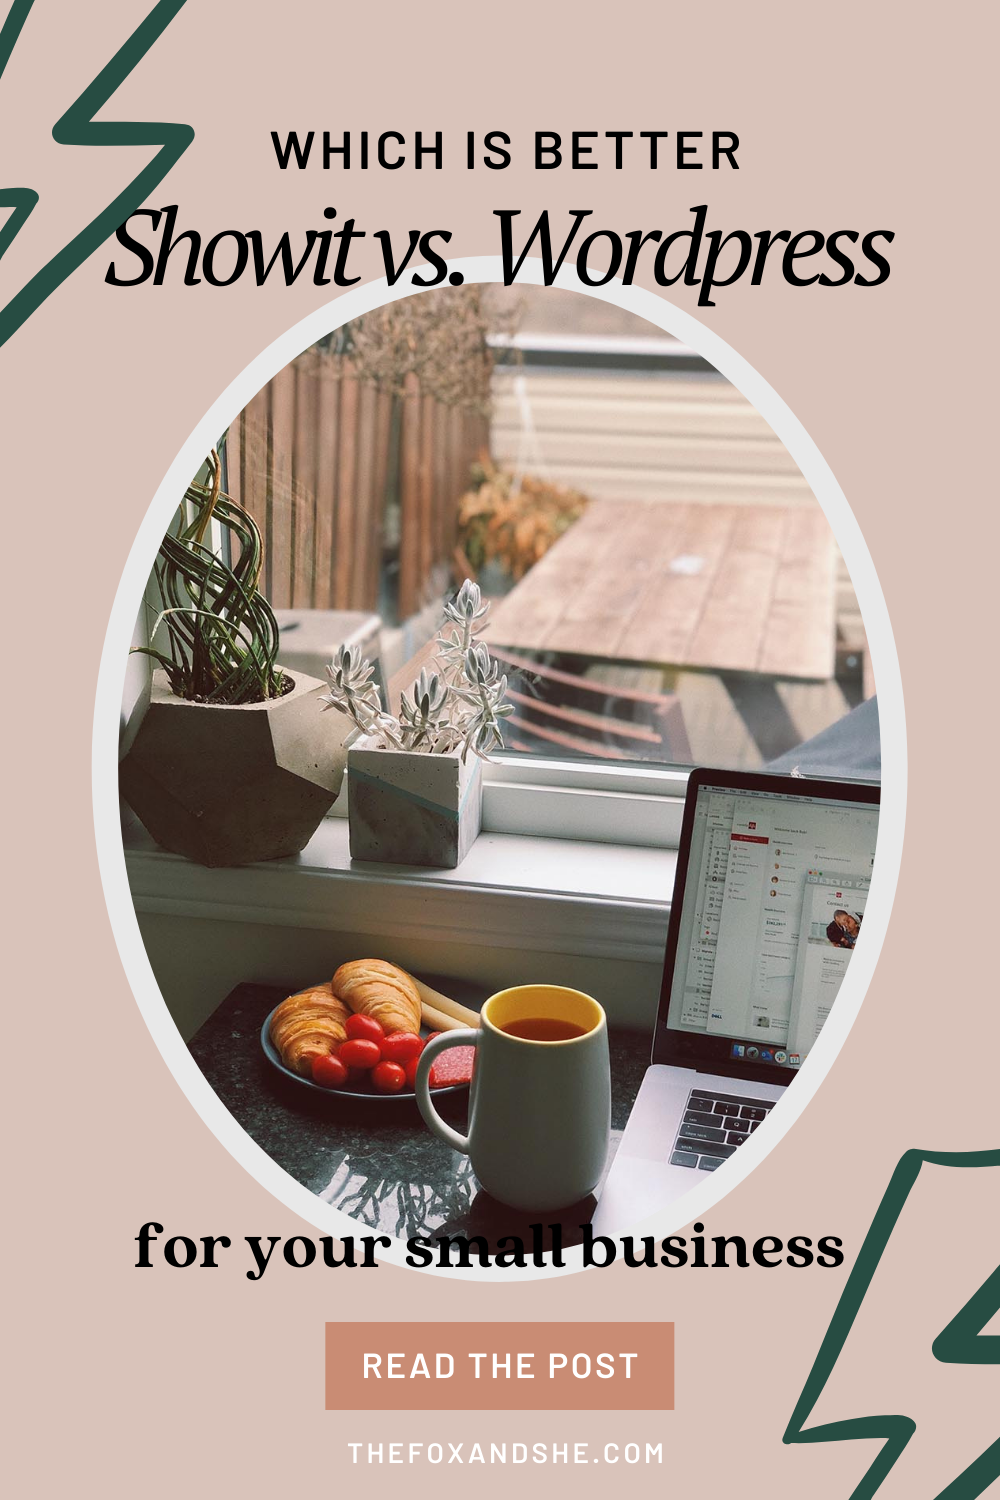 Showit vs. WordPress: Which platform is best for your small business? | TheFoxandShe.com